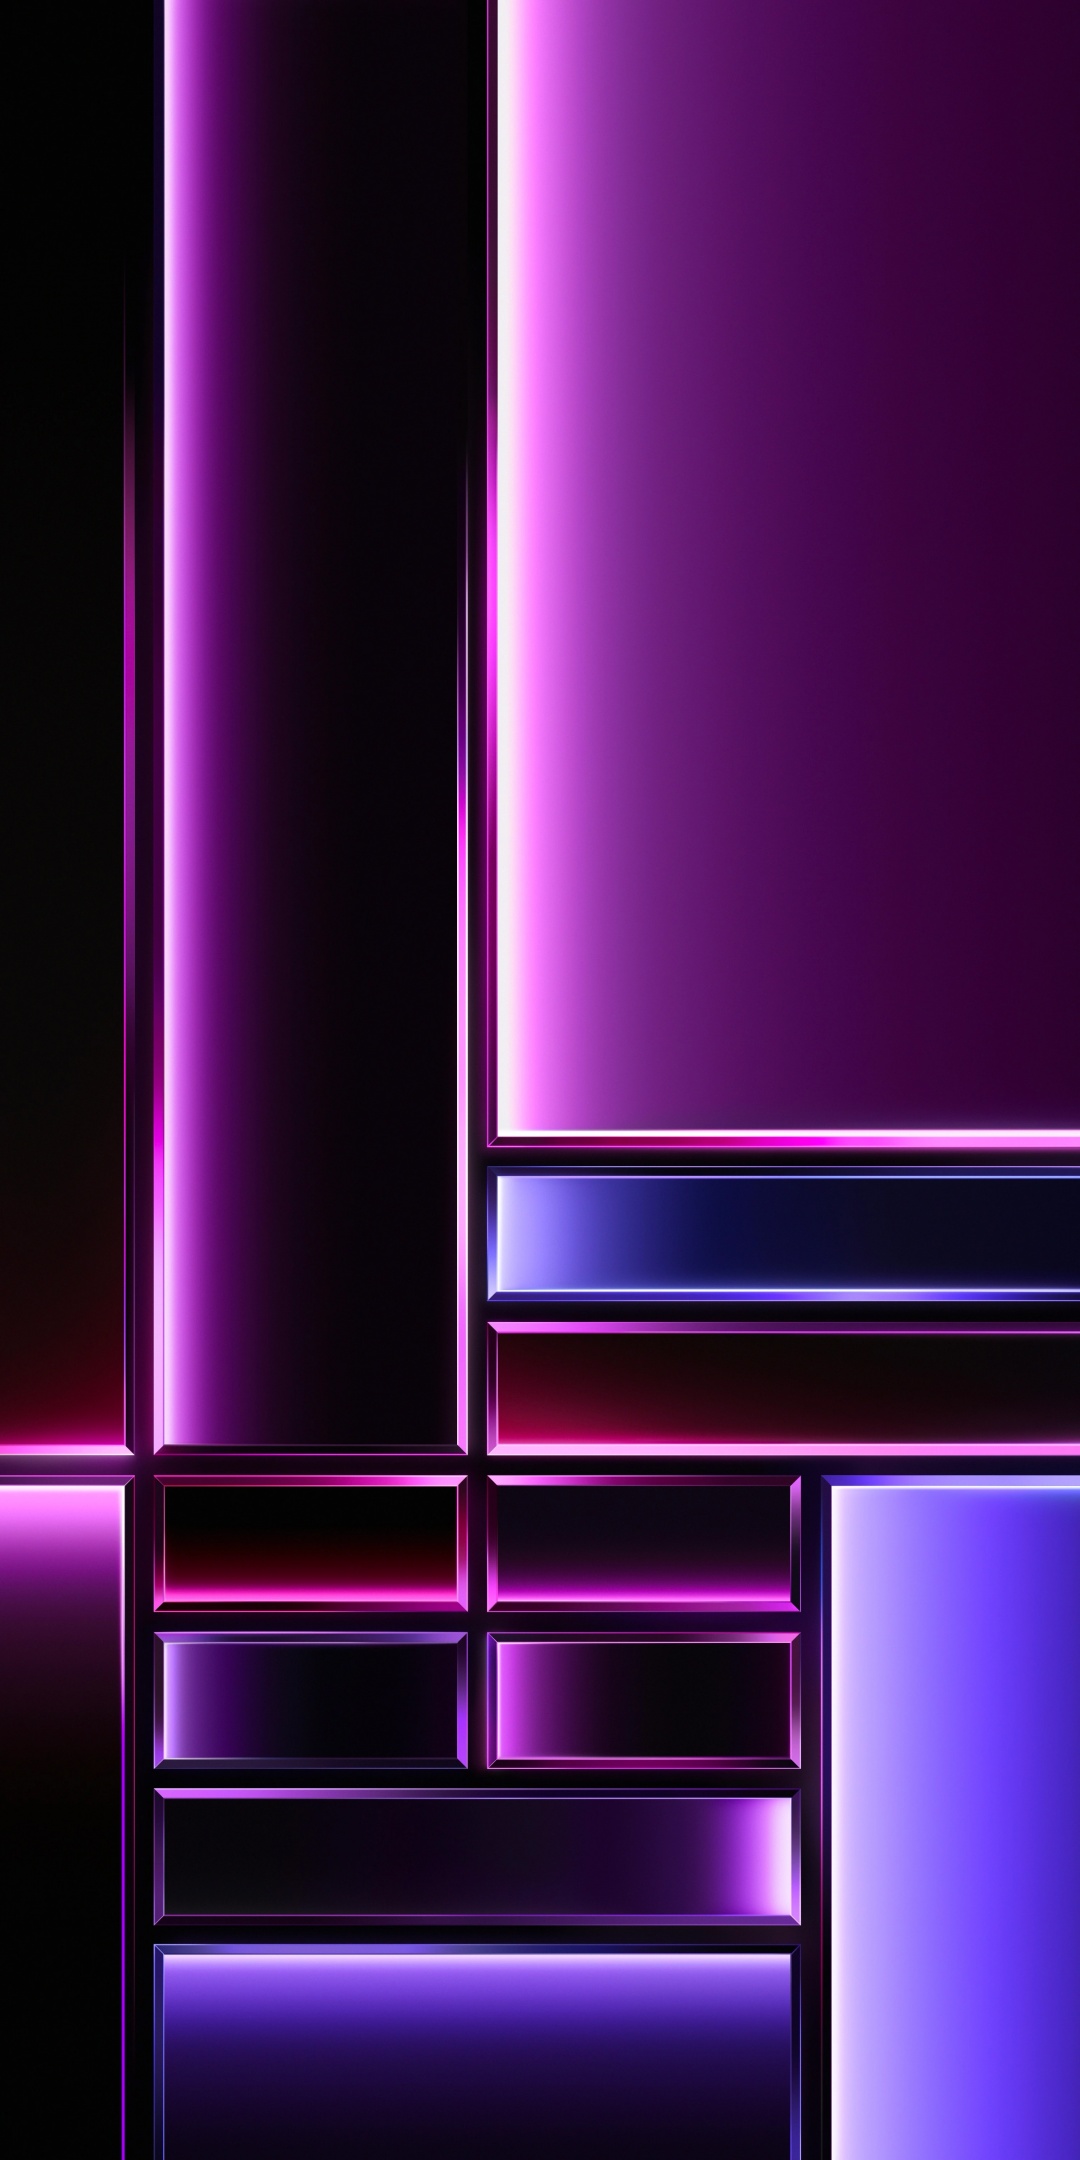 An abstract image of a purple and blue neon lit wall - Magenta